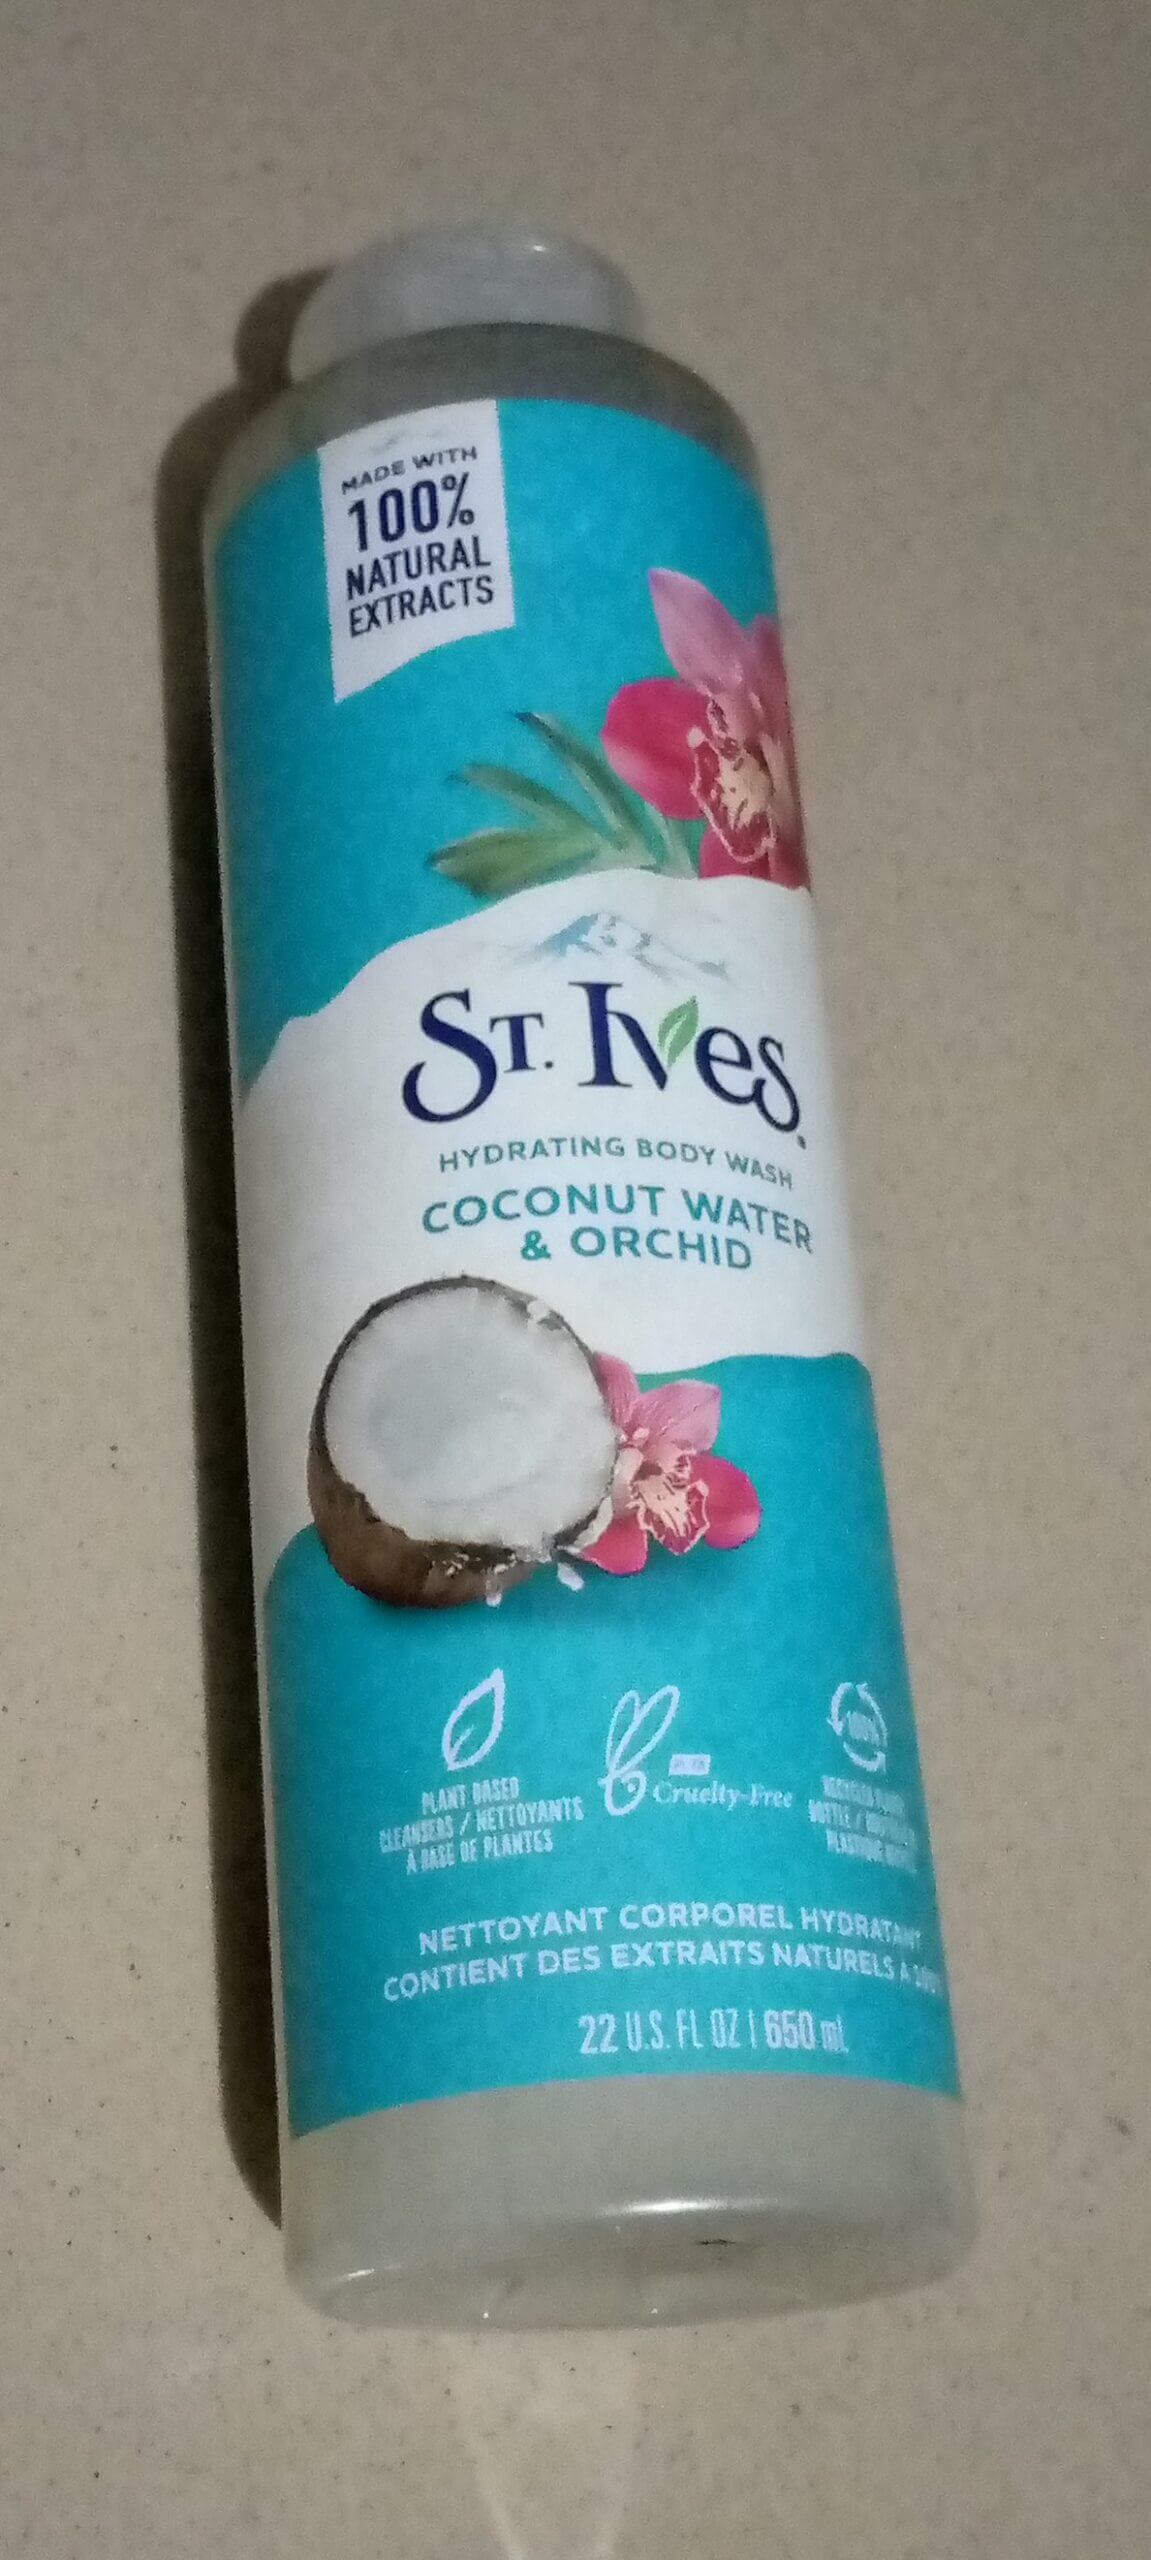 ST IVES HYDRATING BODY WASH REVIEW